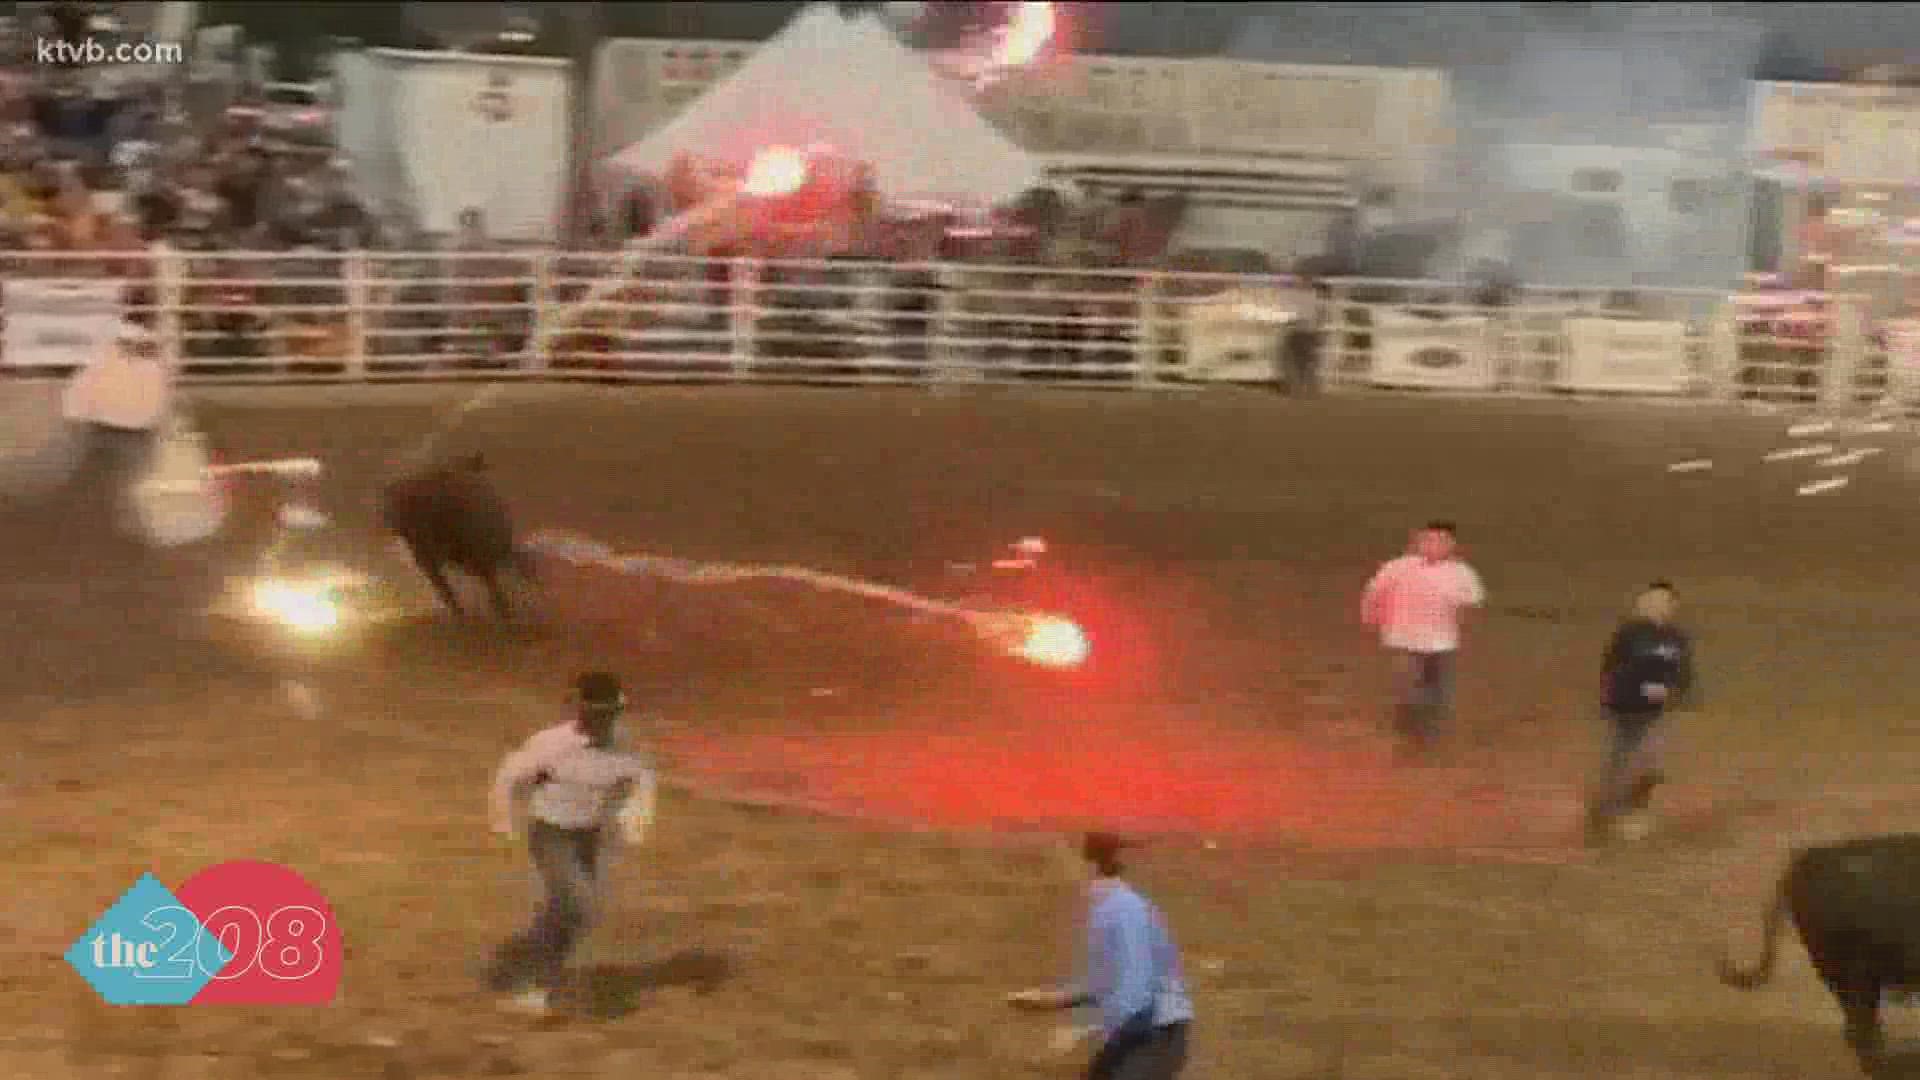 Video captured by an attendee shows roman candles being shot at the cattle and fireworks bouncing off of the cows' heads.